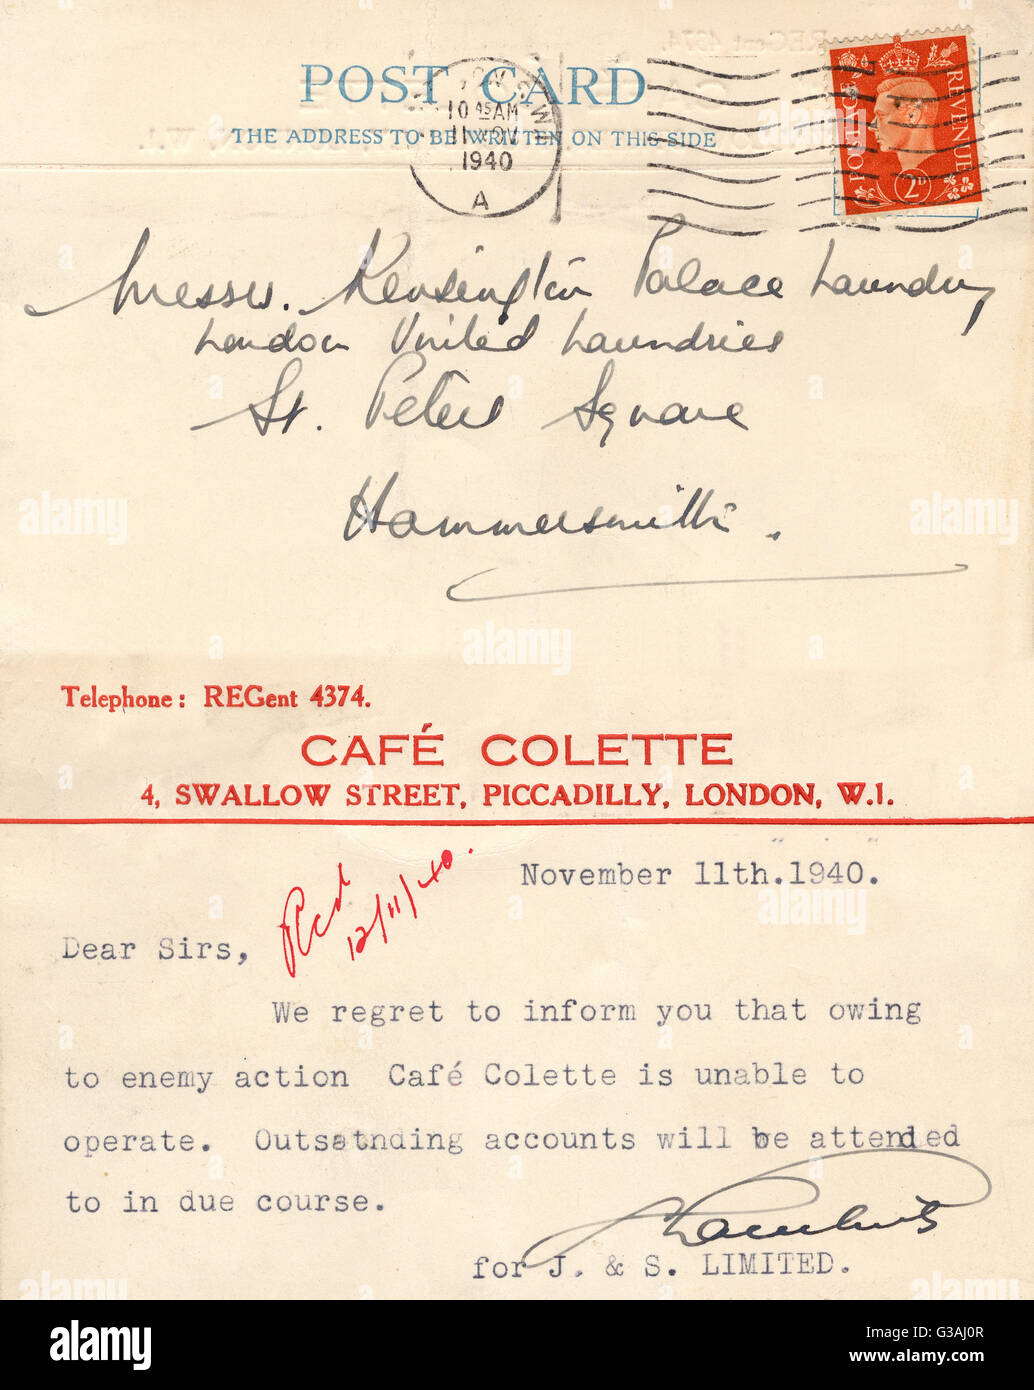 WW2 Home Front Memorabilia - Damaged Cafe Colette of Swallow Street, London sending information on a printed card to inform suppliers that (likely due to Bomb damage?) 'owing to enemy action' they are 'unable to operate'. This card was sent to their laund Stock Photo